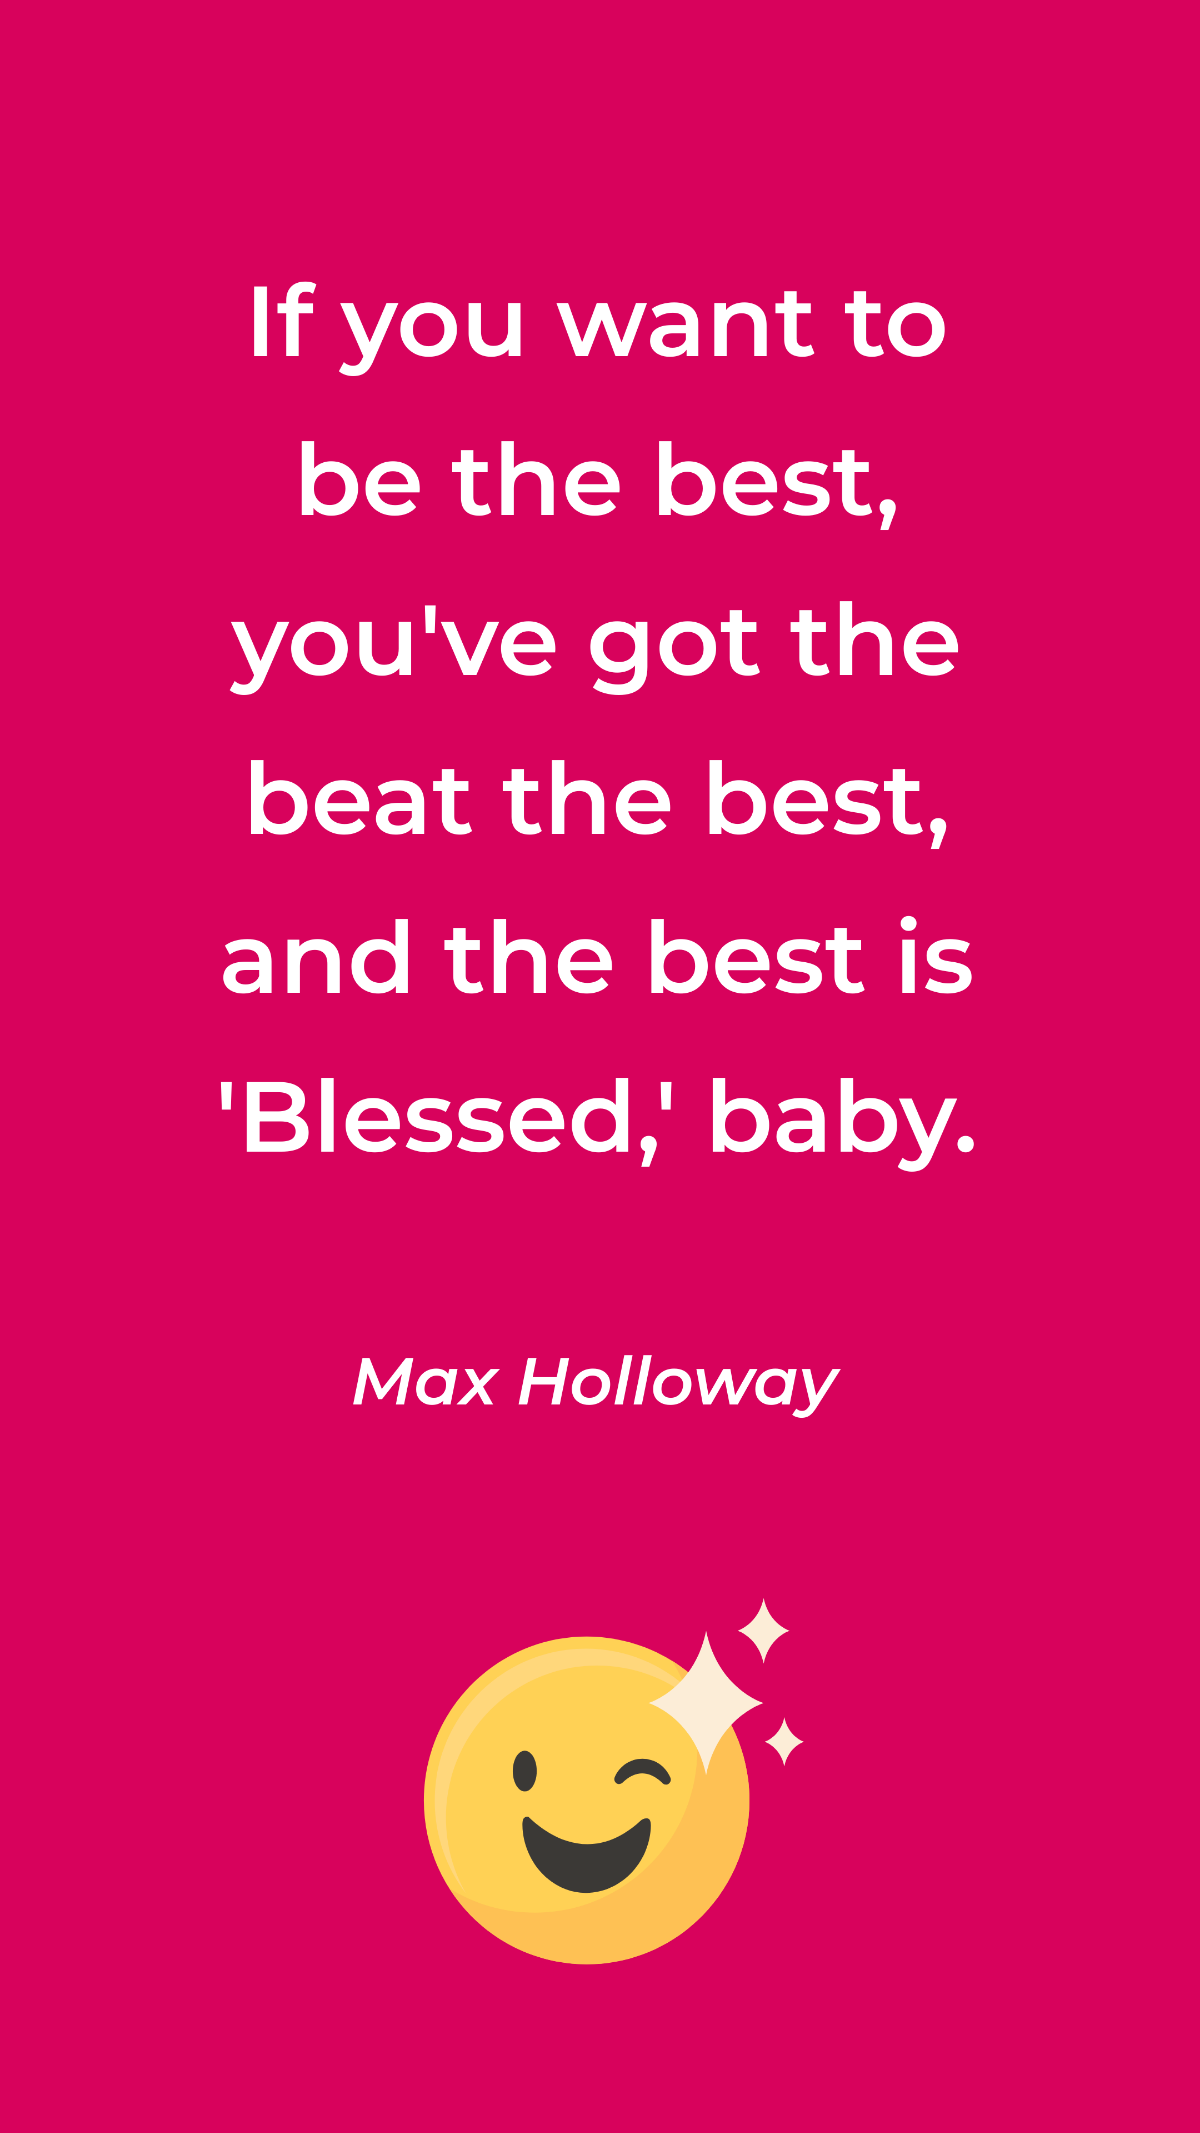 Max Holloway - If you want to be the best, you've got the beat the best, and the best is 'Blessed,' baby.